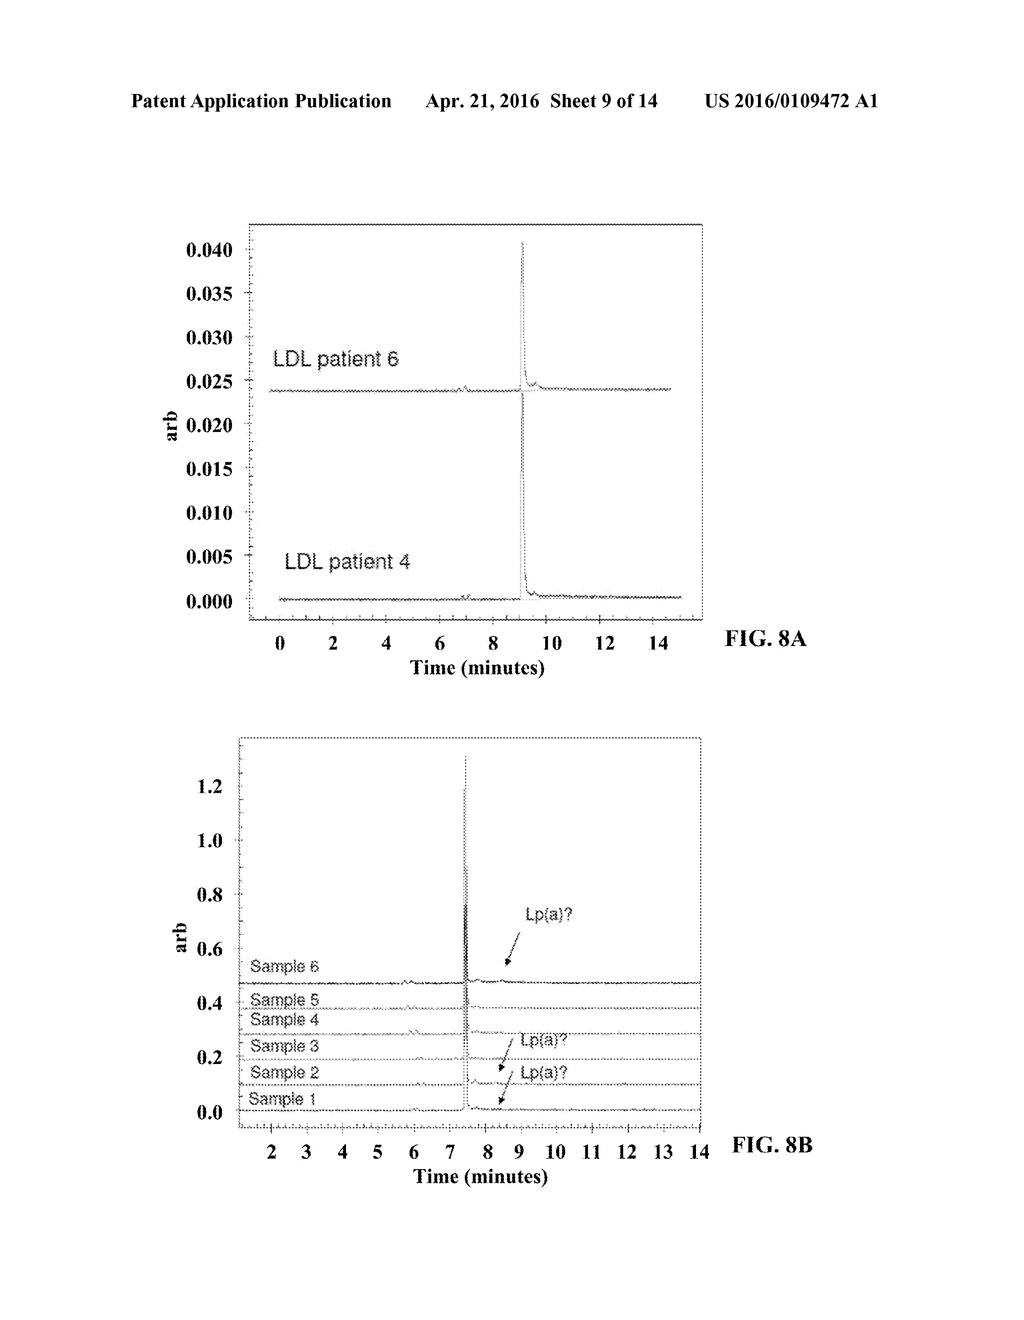 QUANTITATIVE MOLAR CONCENTRATION DETECTION OF SPECIFIC     APOLIPOPROTEIN-CONTAINING PARTICLES PRESENT IN BODILY FLUIDS BY USING     CAPILLARY ELECTROPHORESIS - diagram, schematic, and image 10